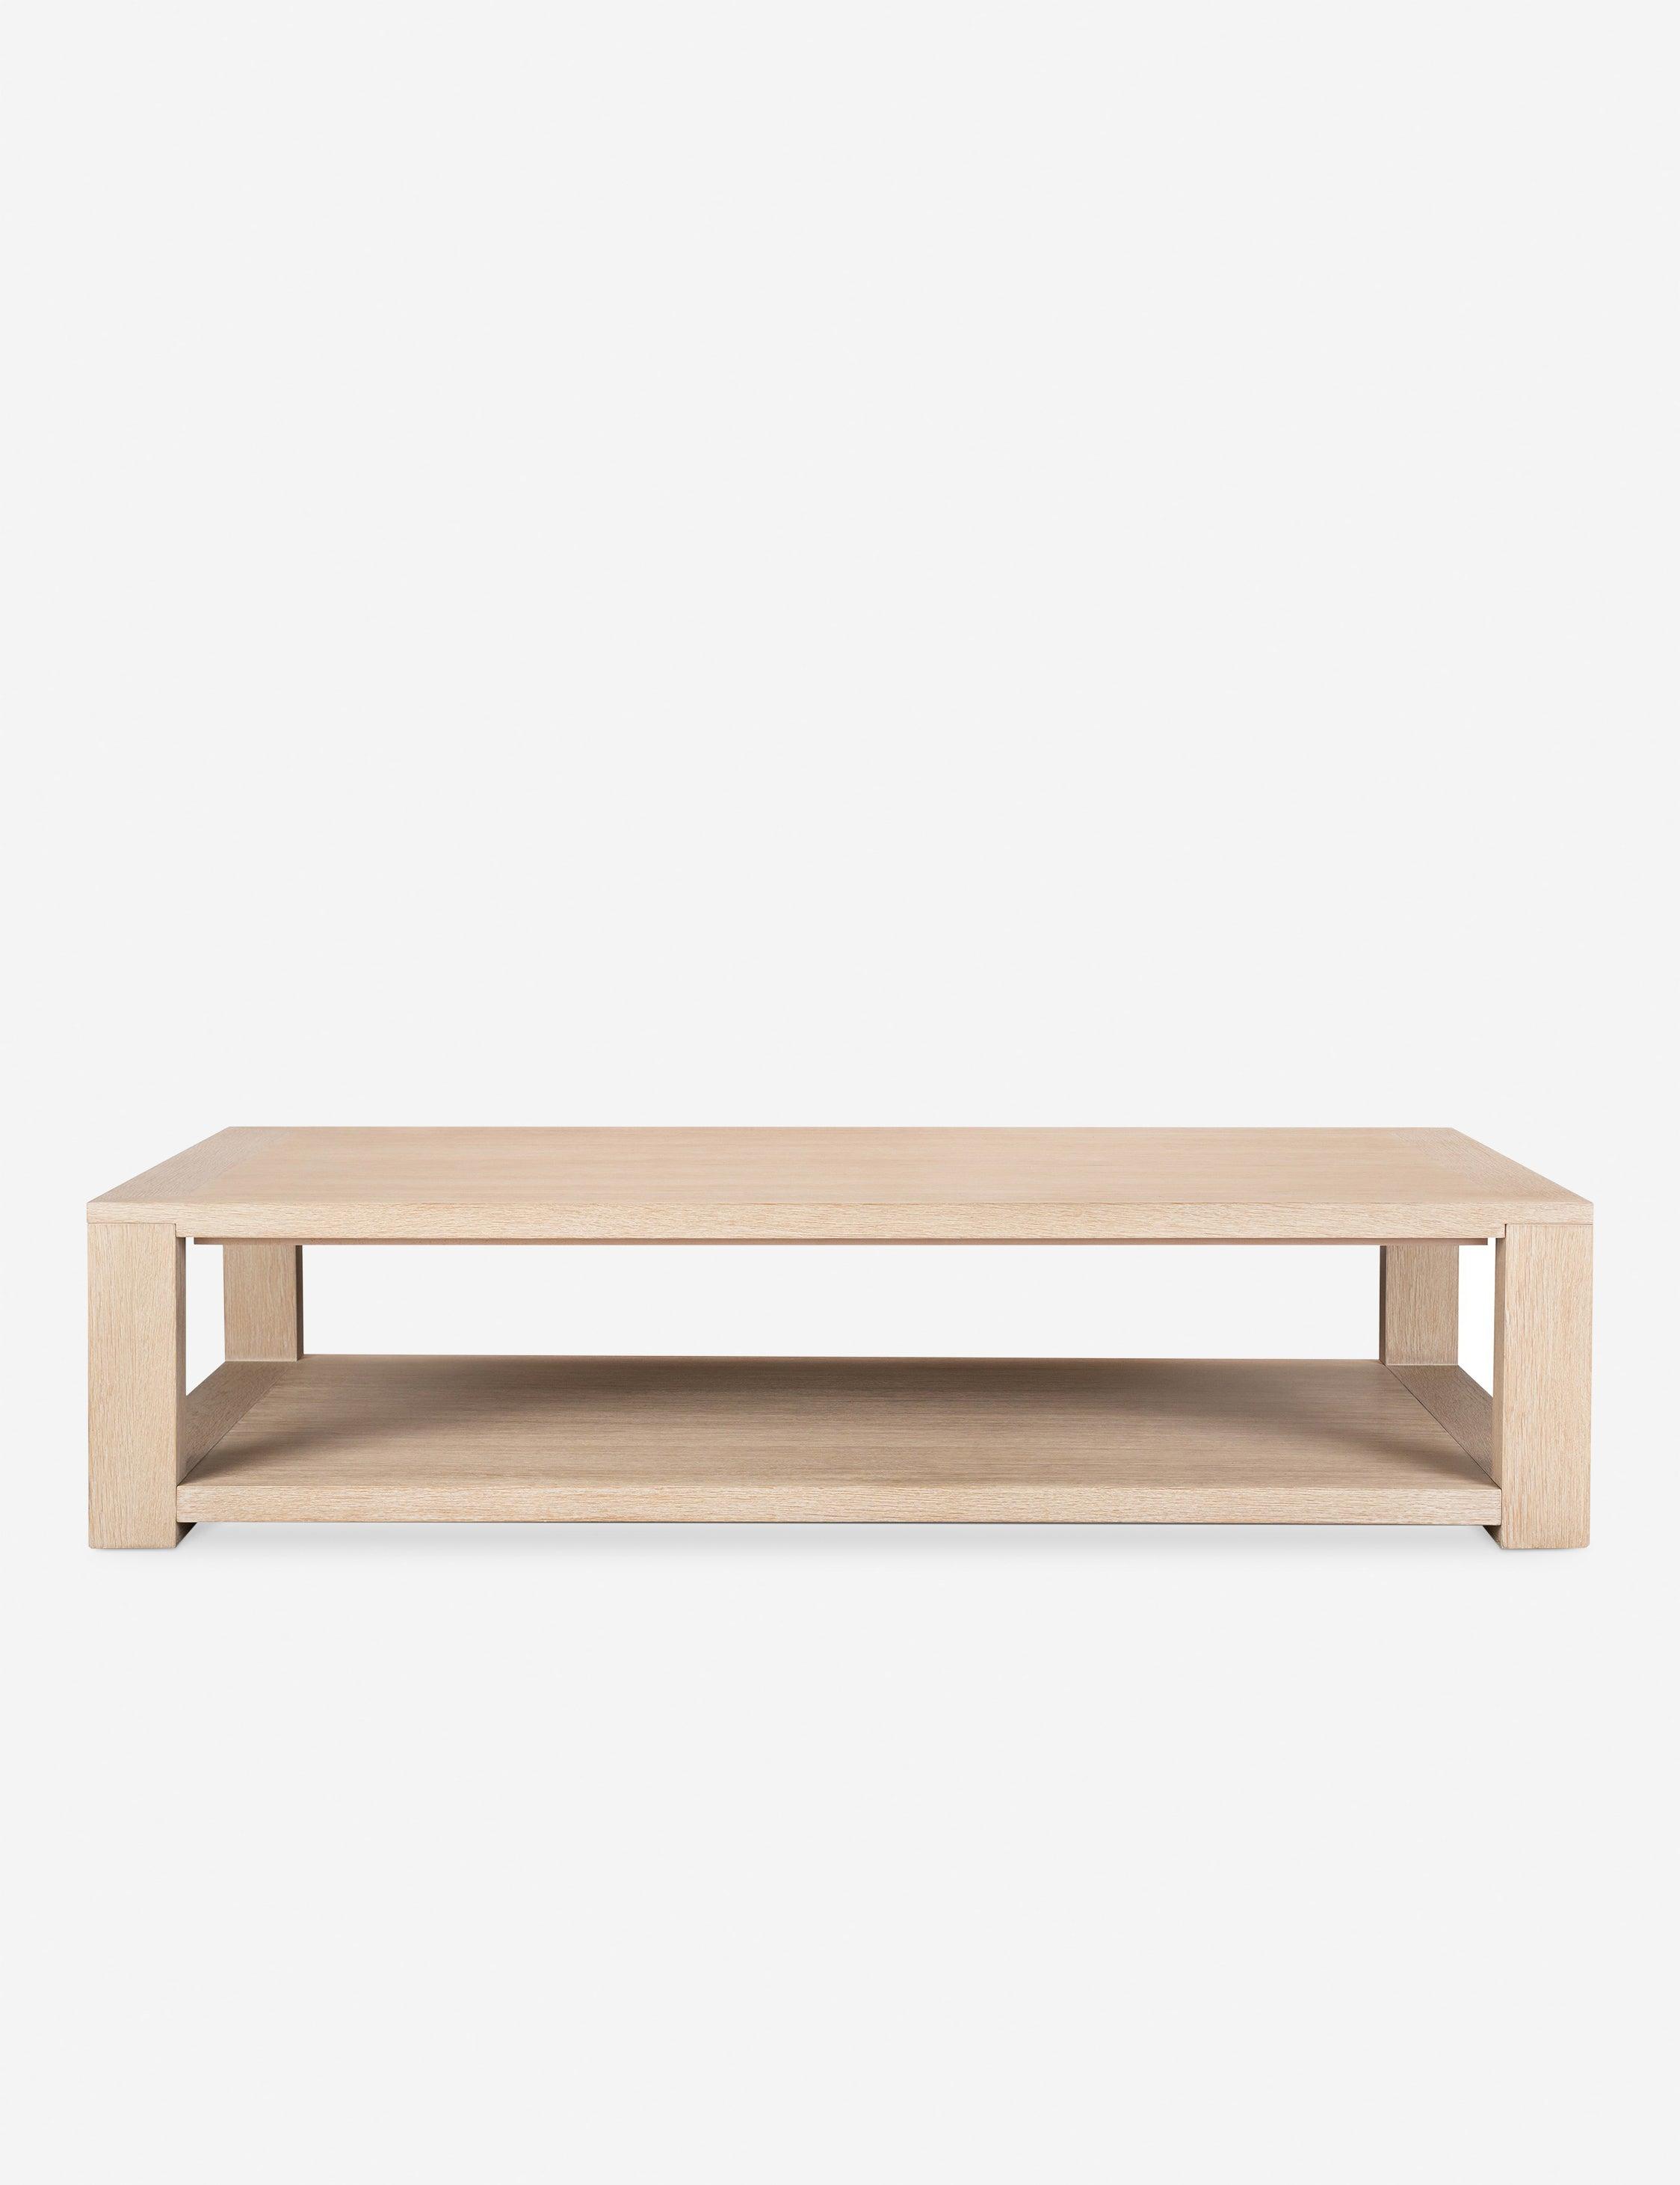 Natural Rectangular Wood Coffee Table with Storage